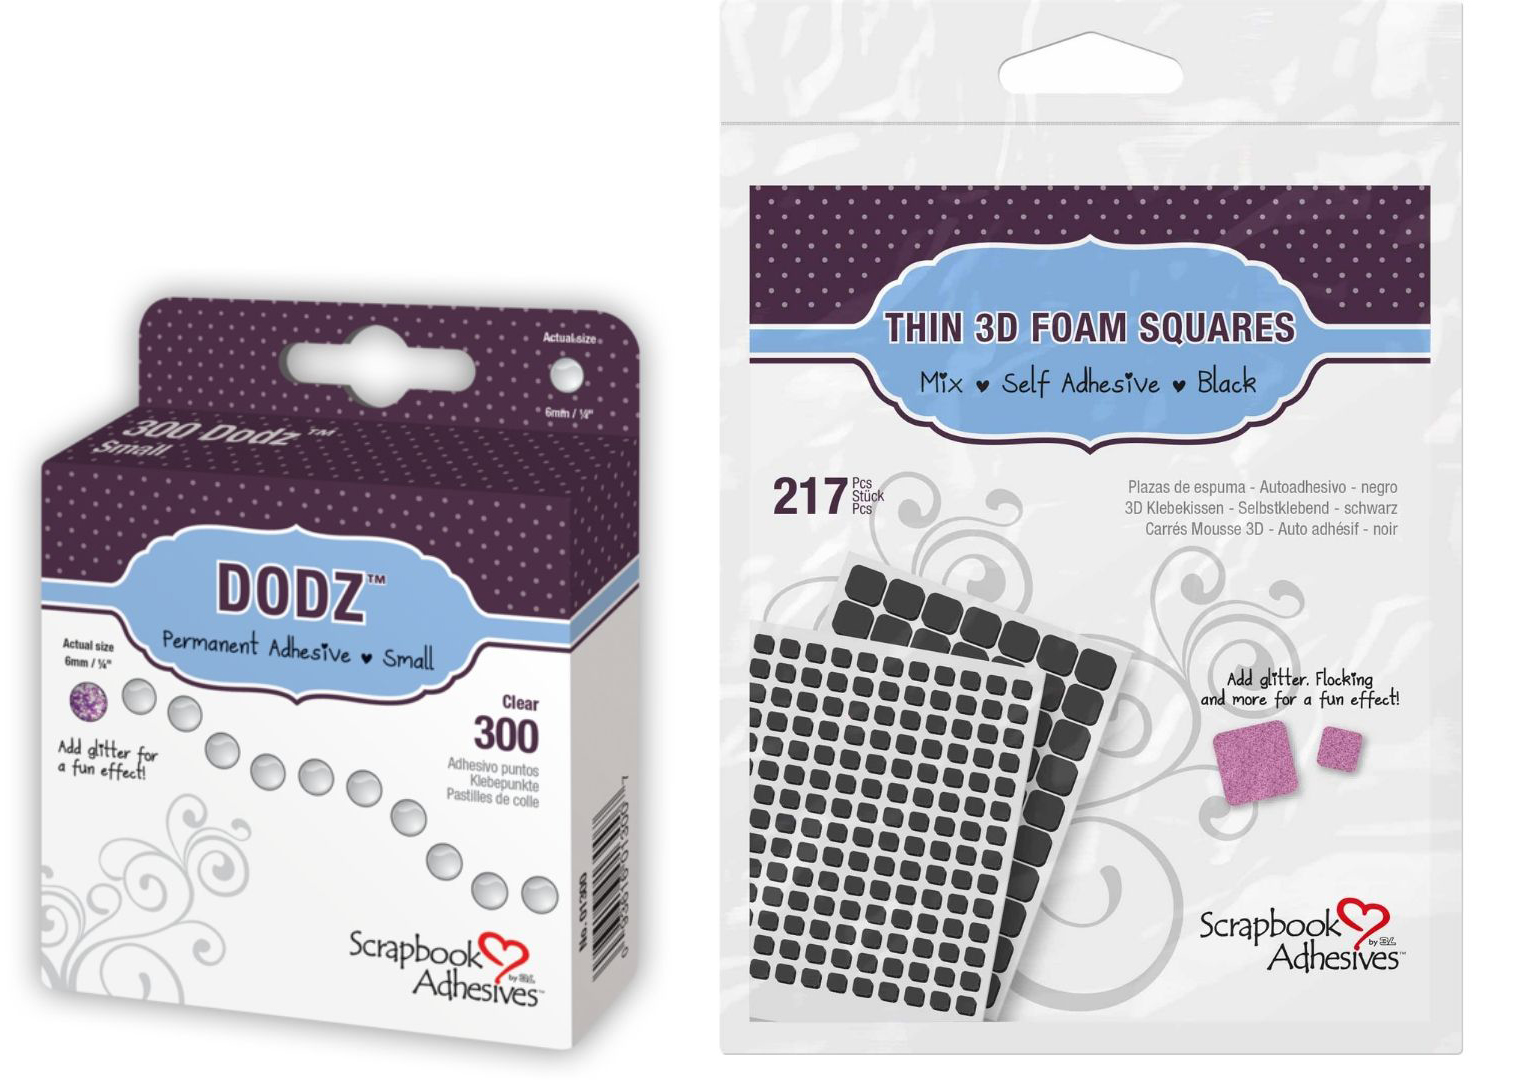 Scrapbook Adhesives by 3L Dodz and 3D Foam Squares